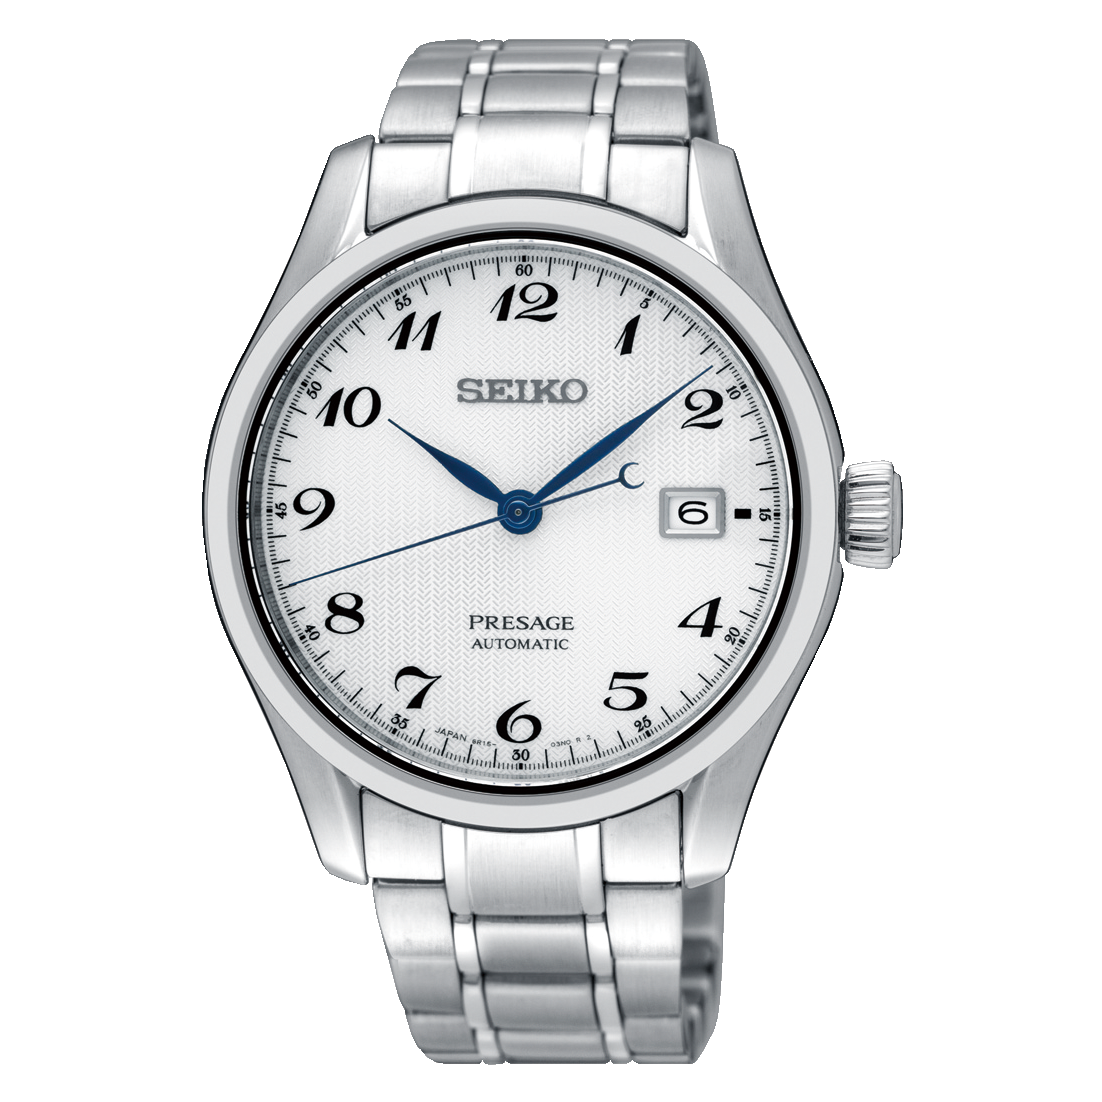 Seiko Presage (Japan Made) Automatic Silver Stainless Steel Band Watch SPB063J1 (Not for EU Buyers)